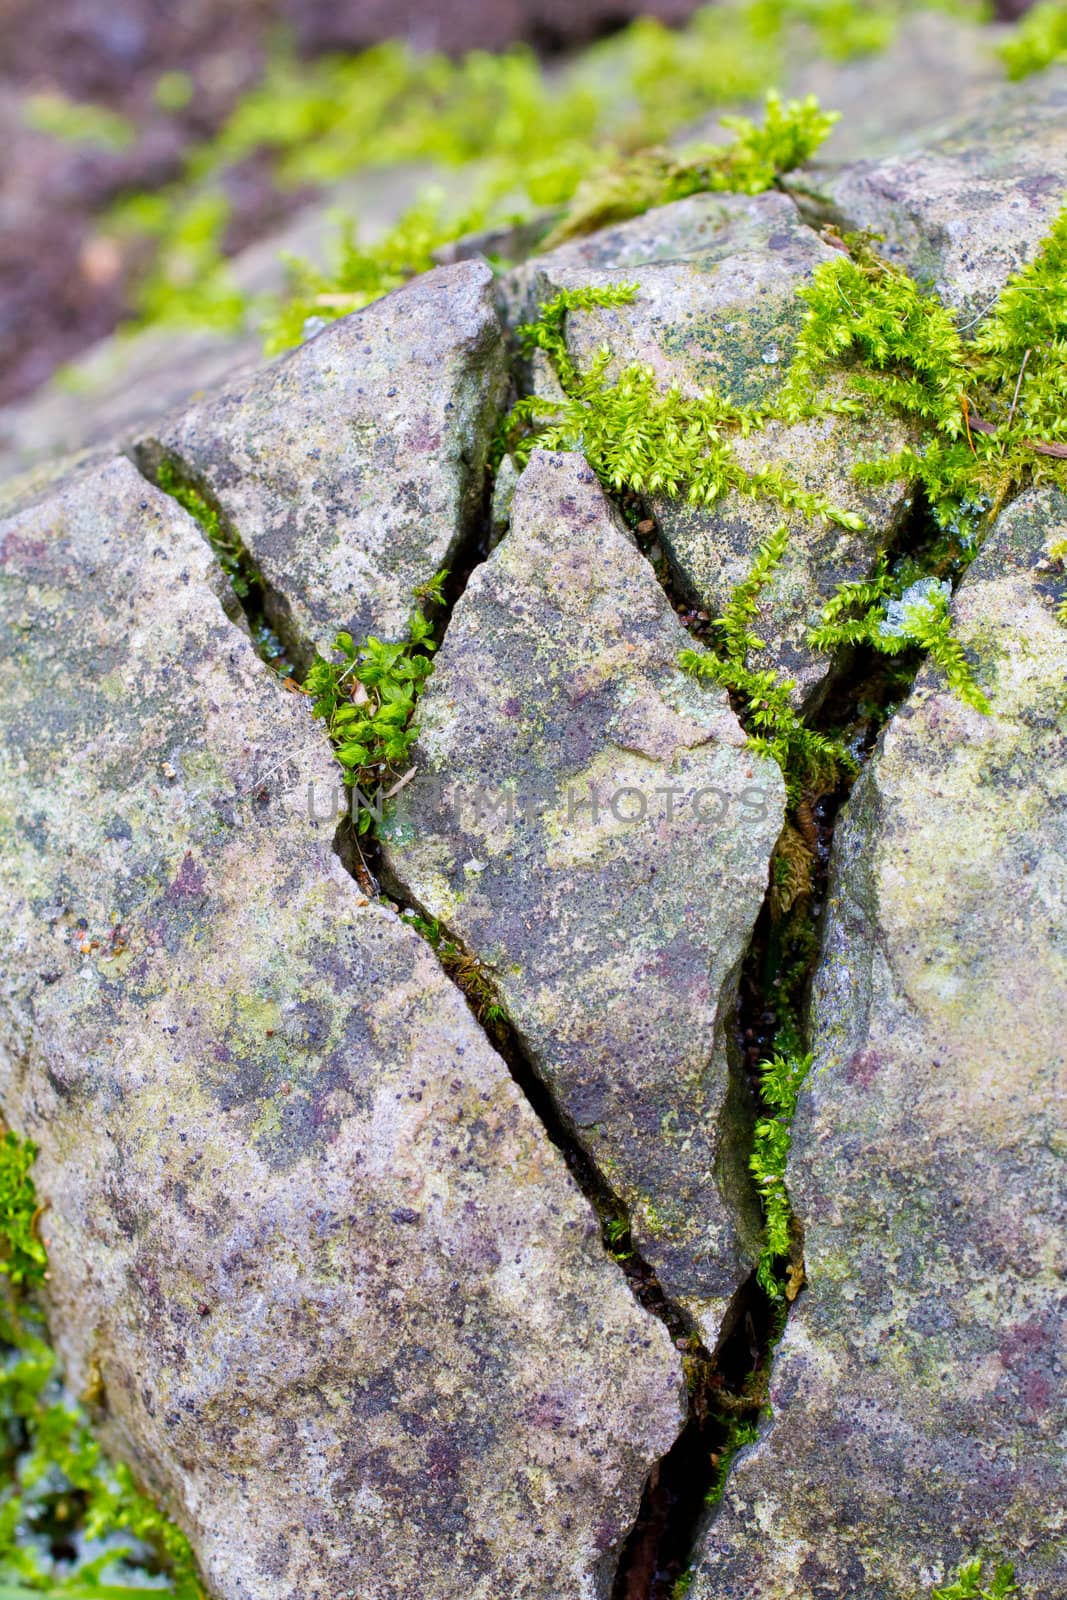 Some stones have big cracks in them and moss plantlife is growing out of the cracks.